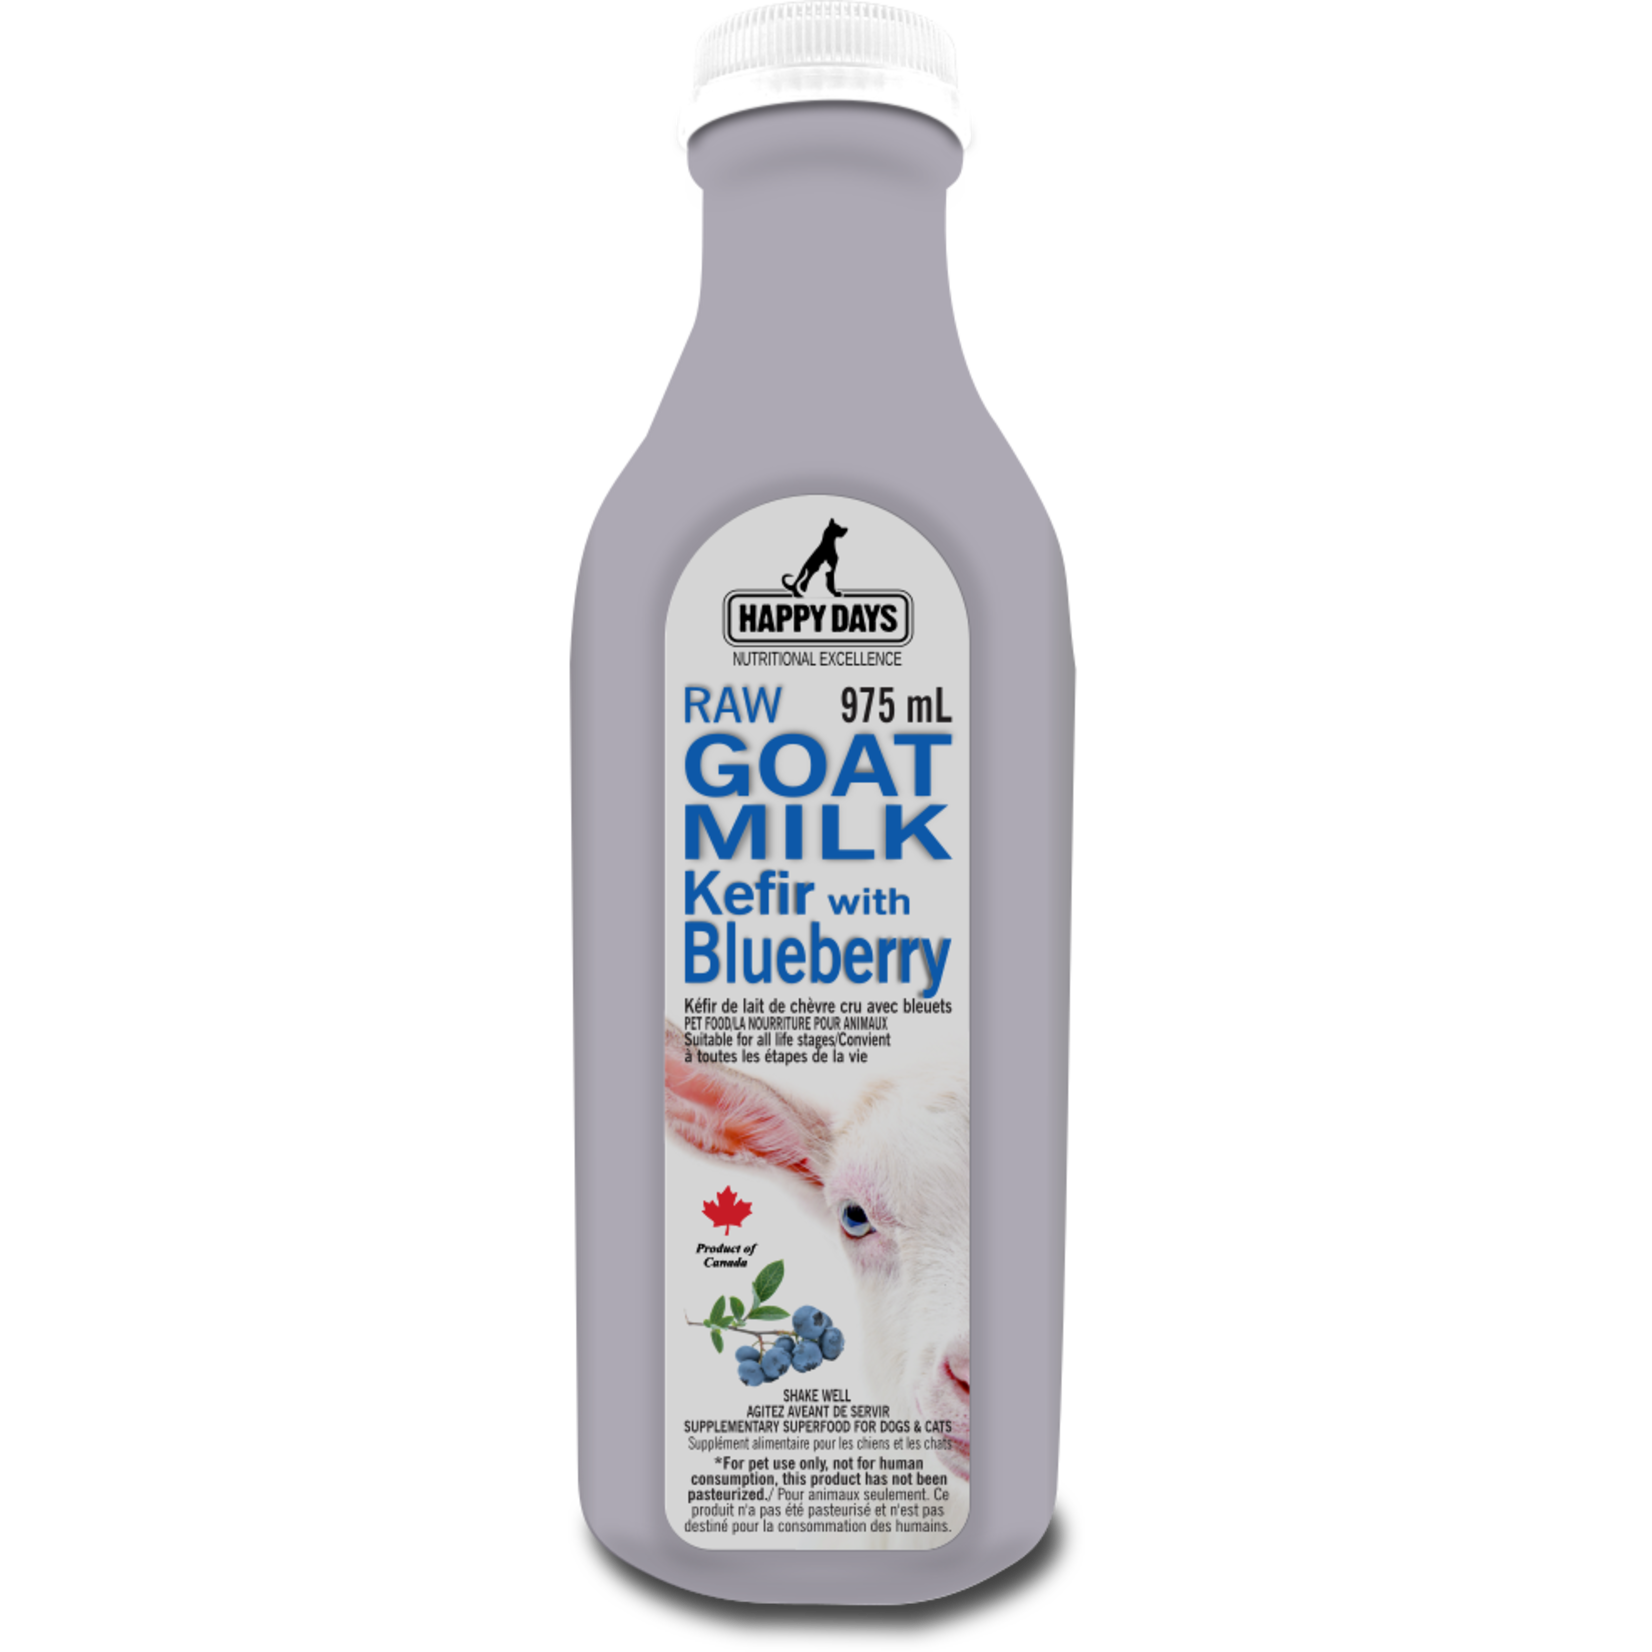 Happy Days Happy Days Raw Goat Milk Kefir with Blueberry 975ml    (DELIVERY UNAVAILABLE FOR THIS ITEM)